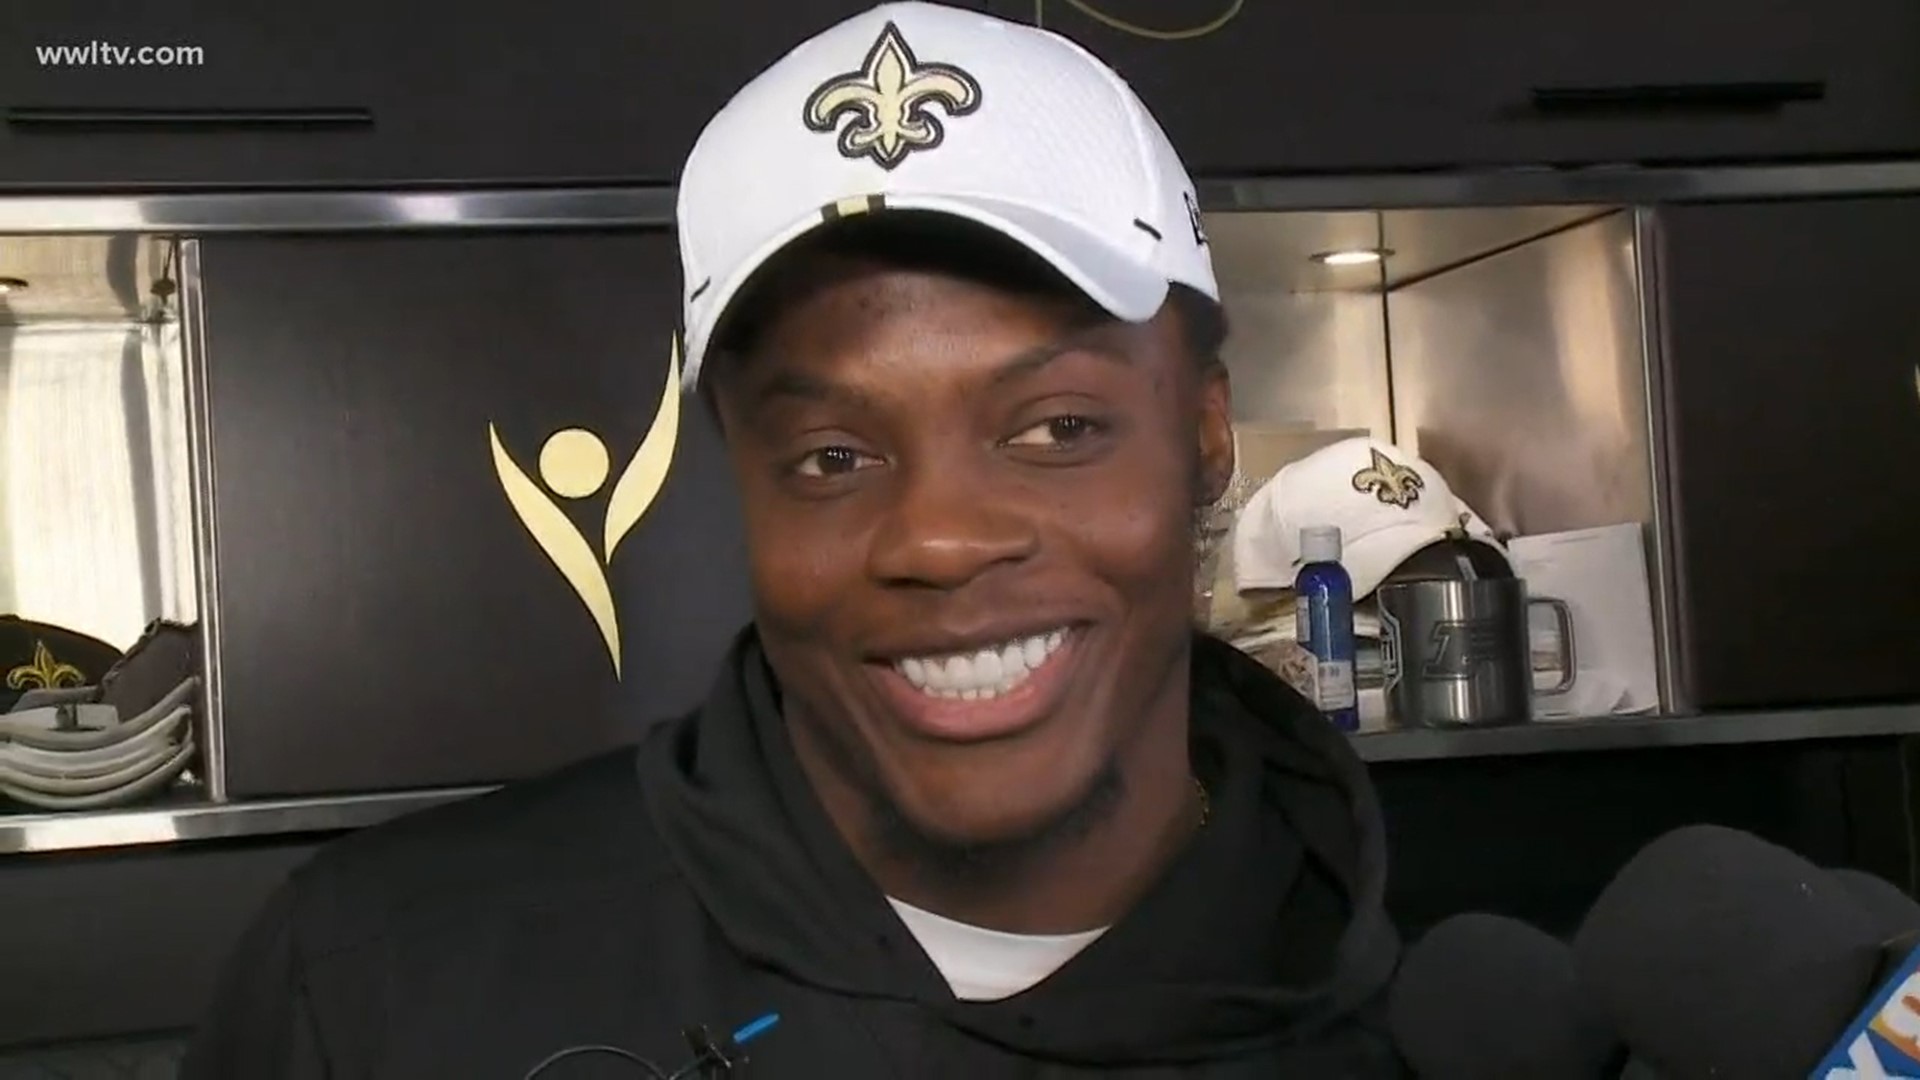 You see a lot of people outside the Superdome after a Saints game, but have you seen Teddy Bridgewater?